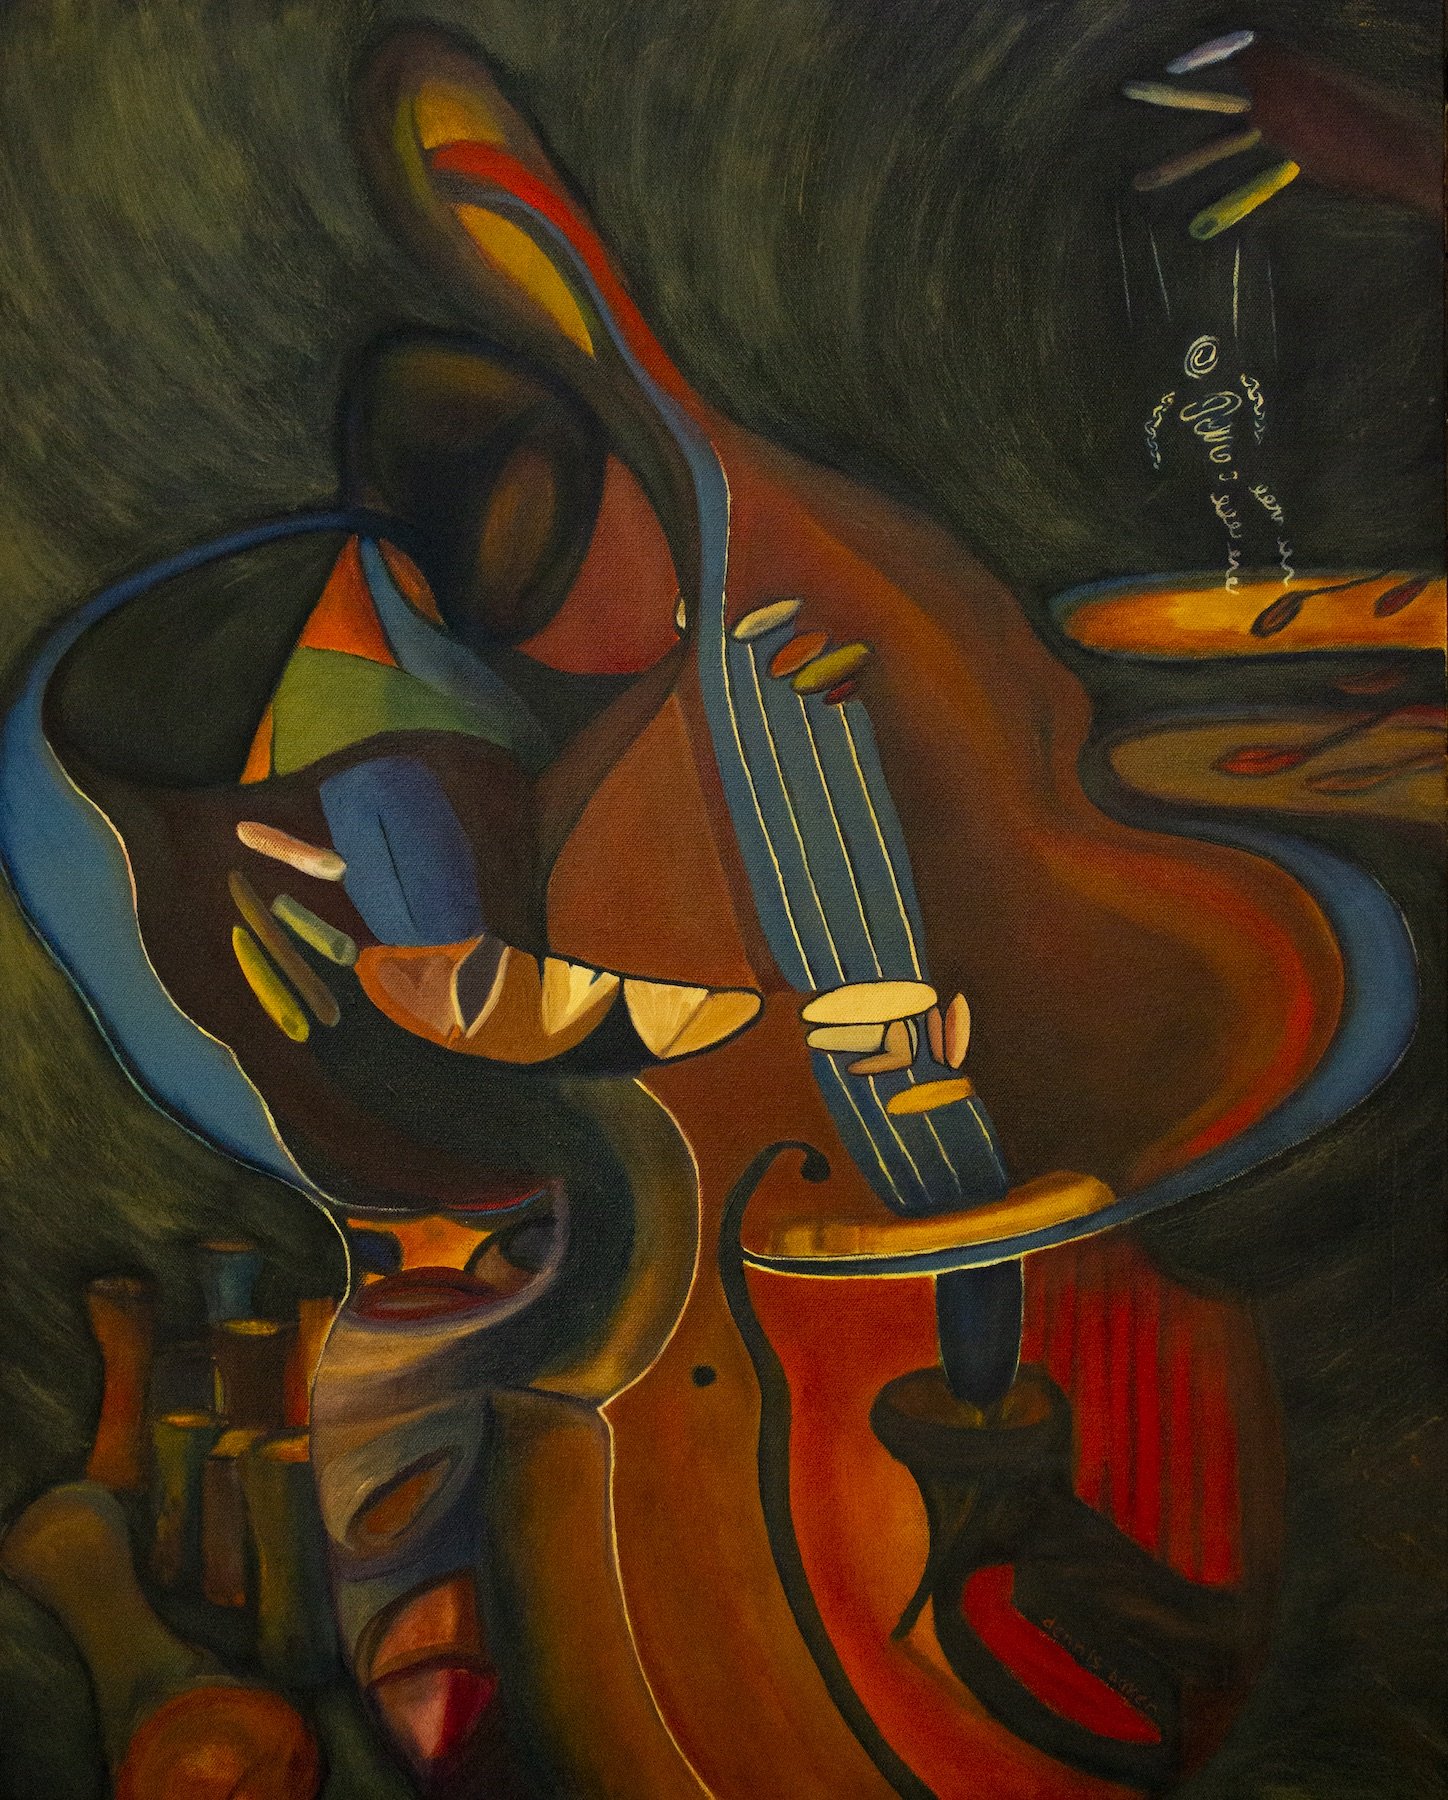 Flamenco Bass 24x30 Oil on canvas $3500 Reproductions Avail $350